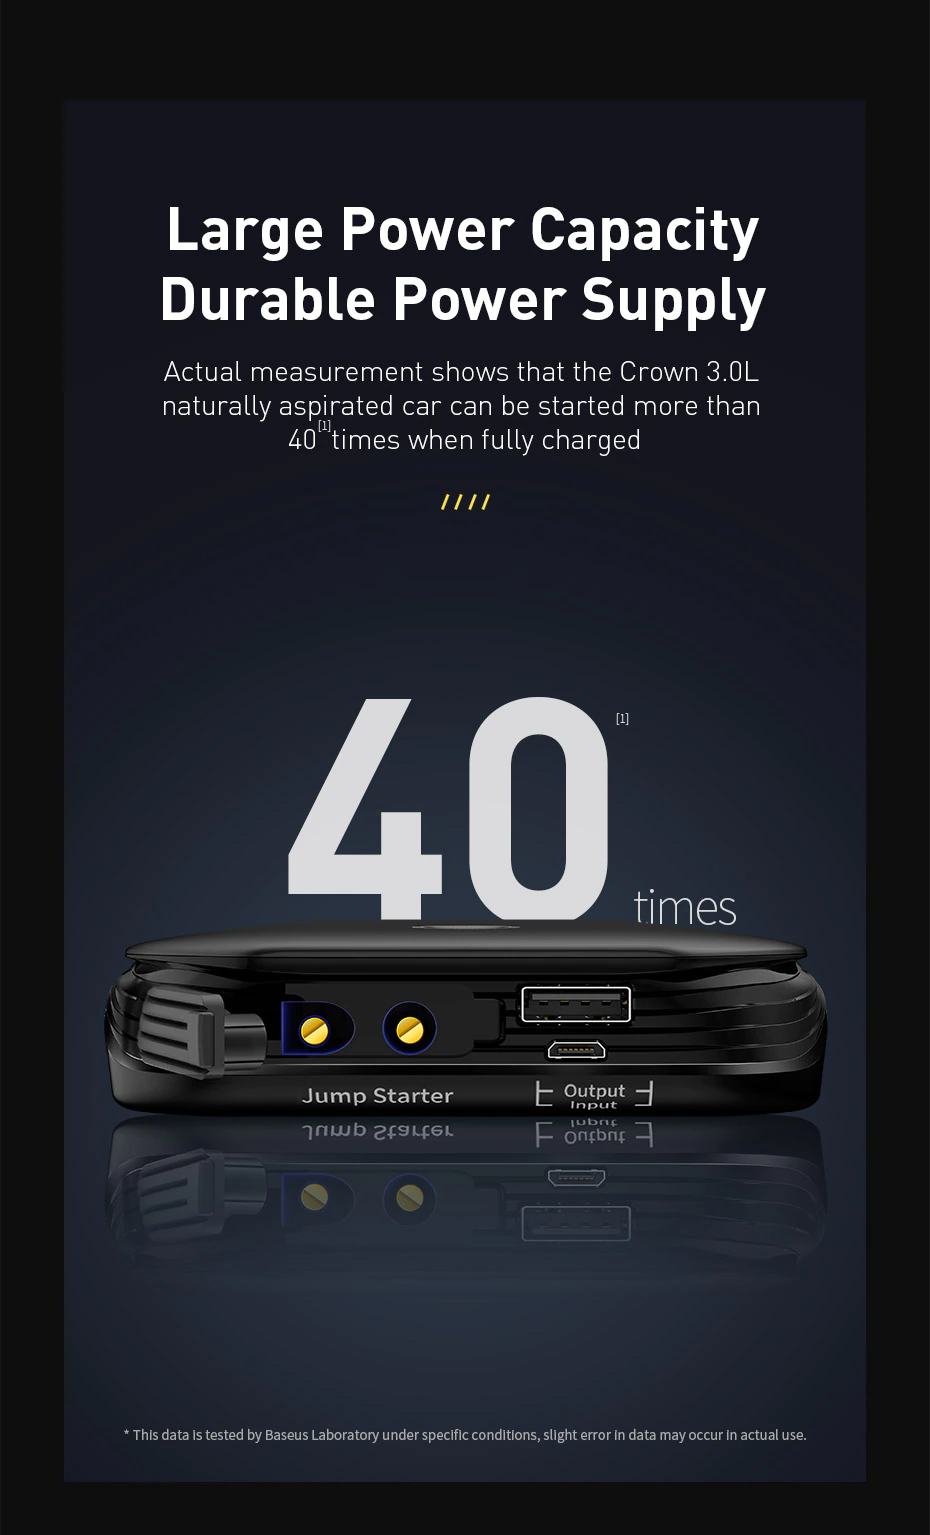 Large Power Capacity Durable Power Supply Actual measurement shows that the Crown 3.0L naturally aspirated car can be started more than 40 times when lully charged